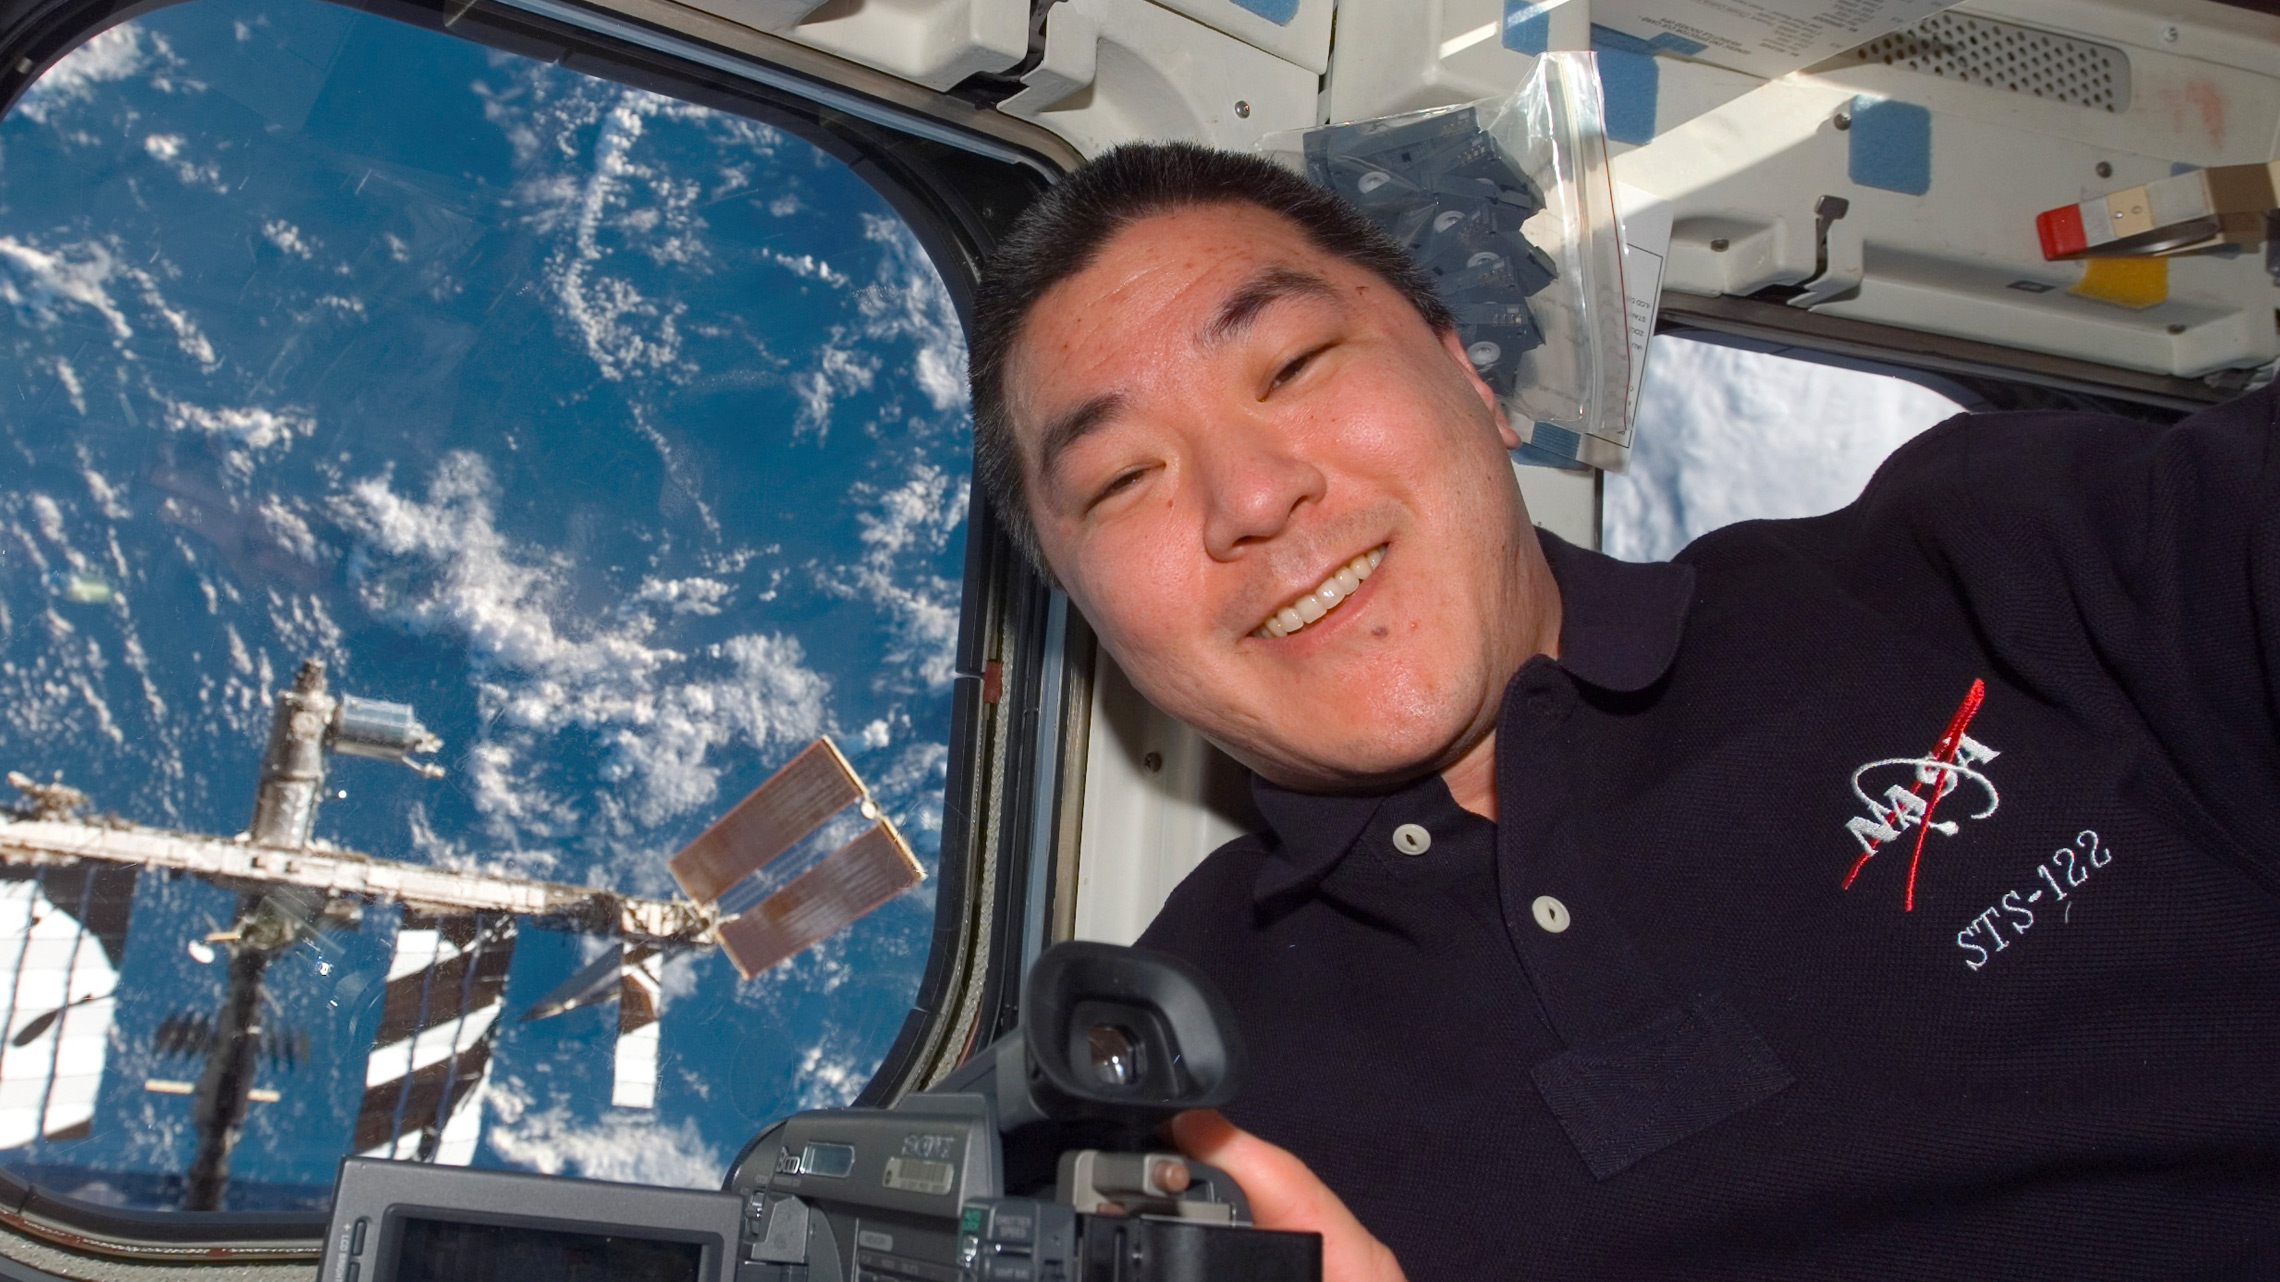 Former NASA space shuttle astronaut Dan Tani aboard a NASA Space Shuttle mission to the International Space Station. The ISS can be seen outside a window while Tani smiles in front of it.